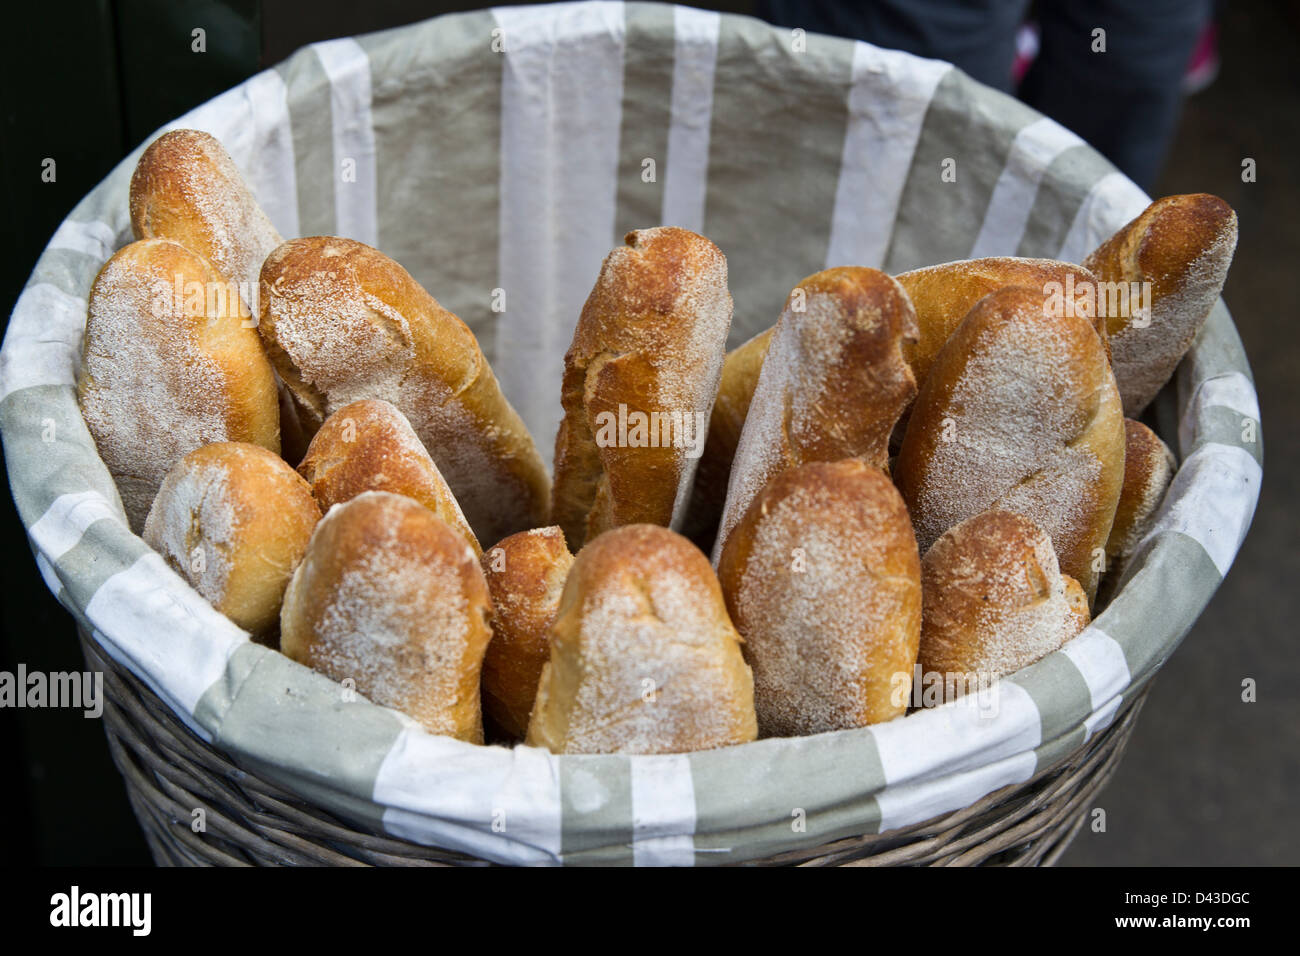 Baguettes in a basket Stock Photo